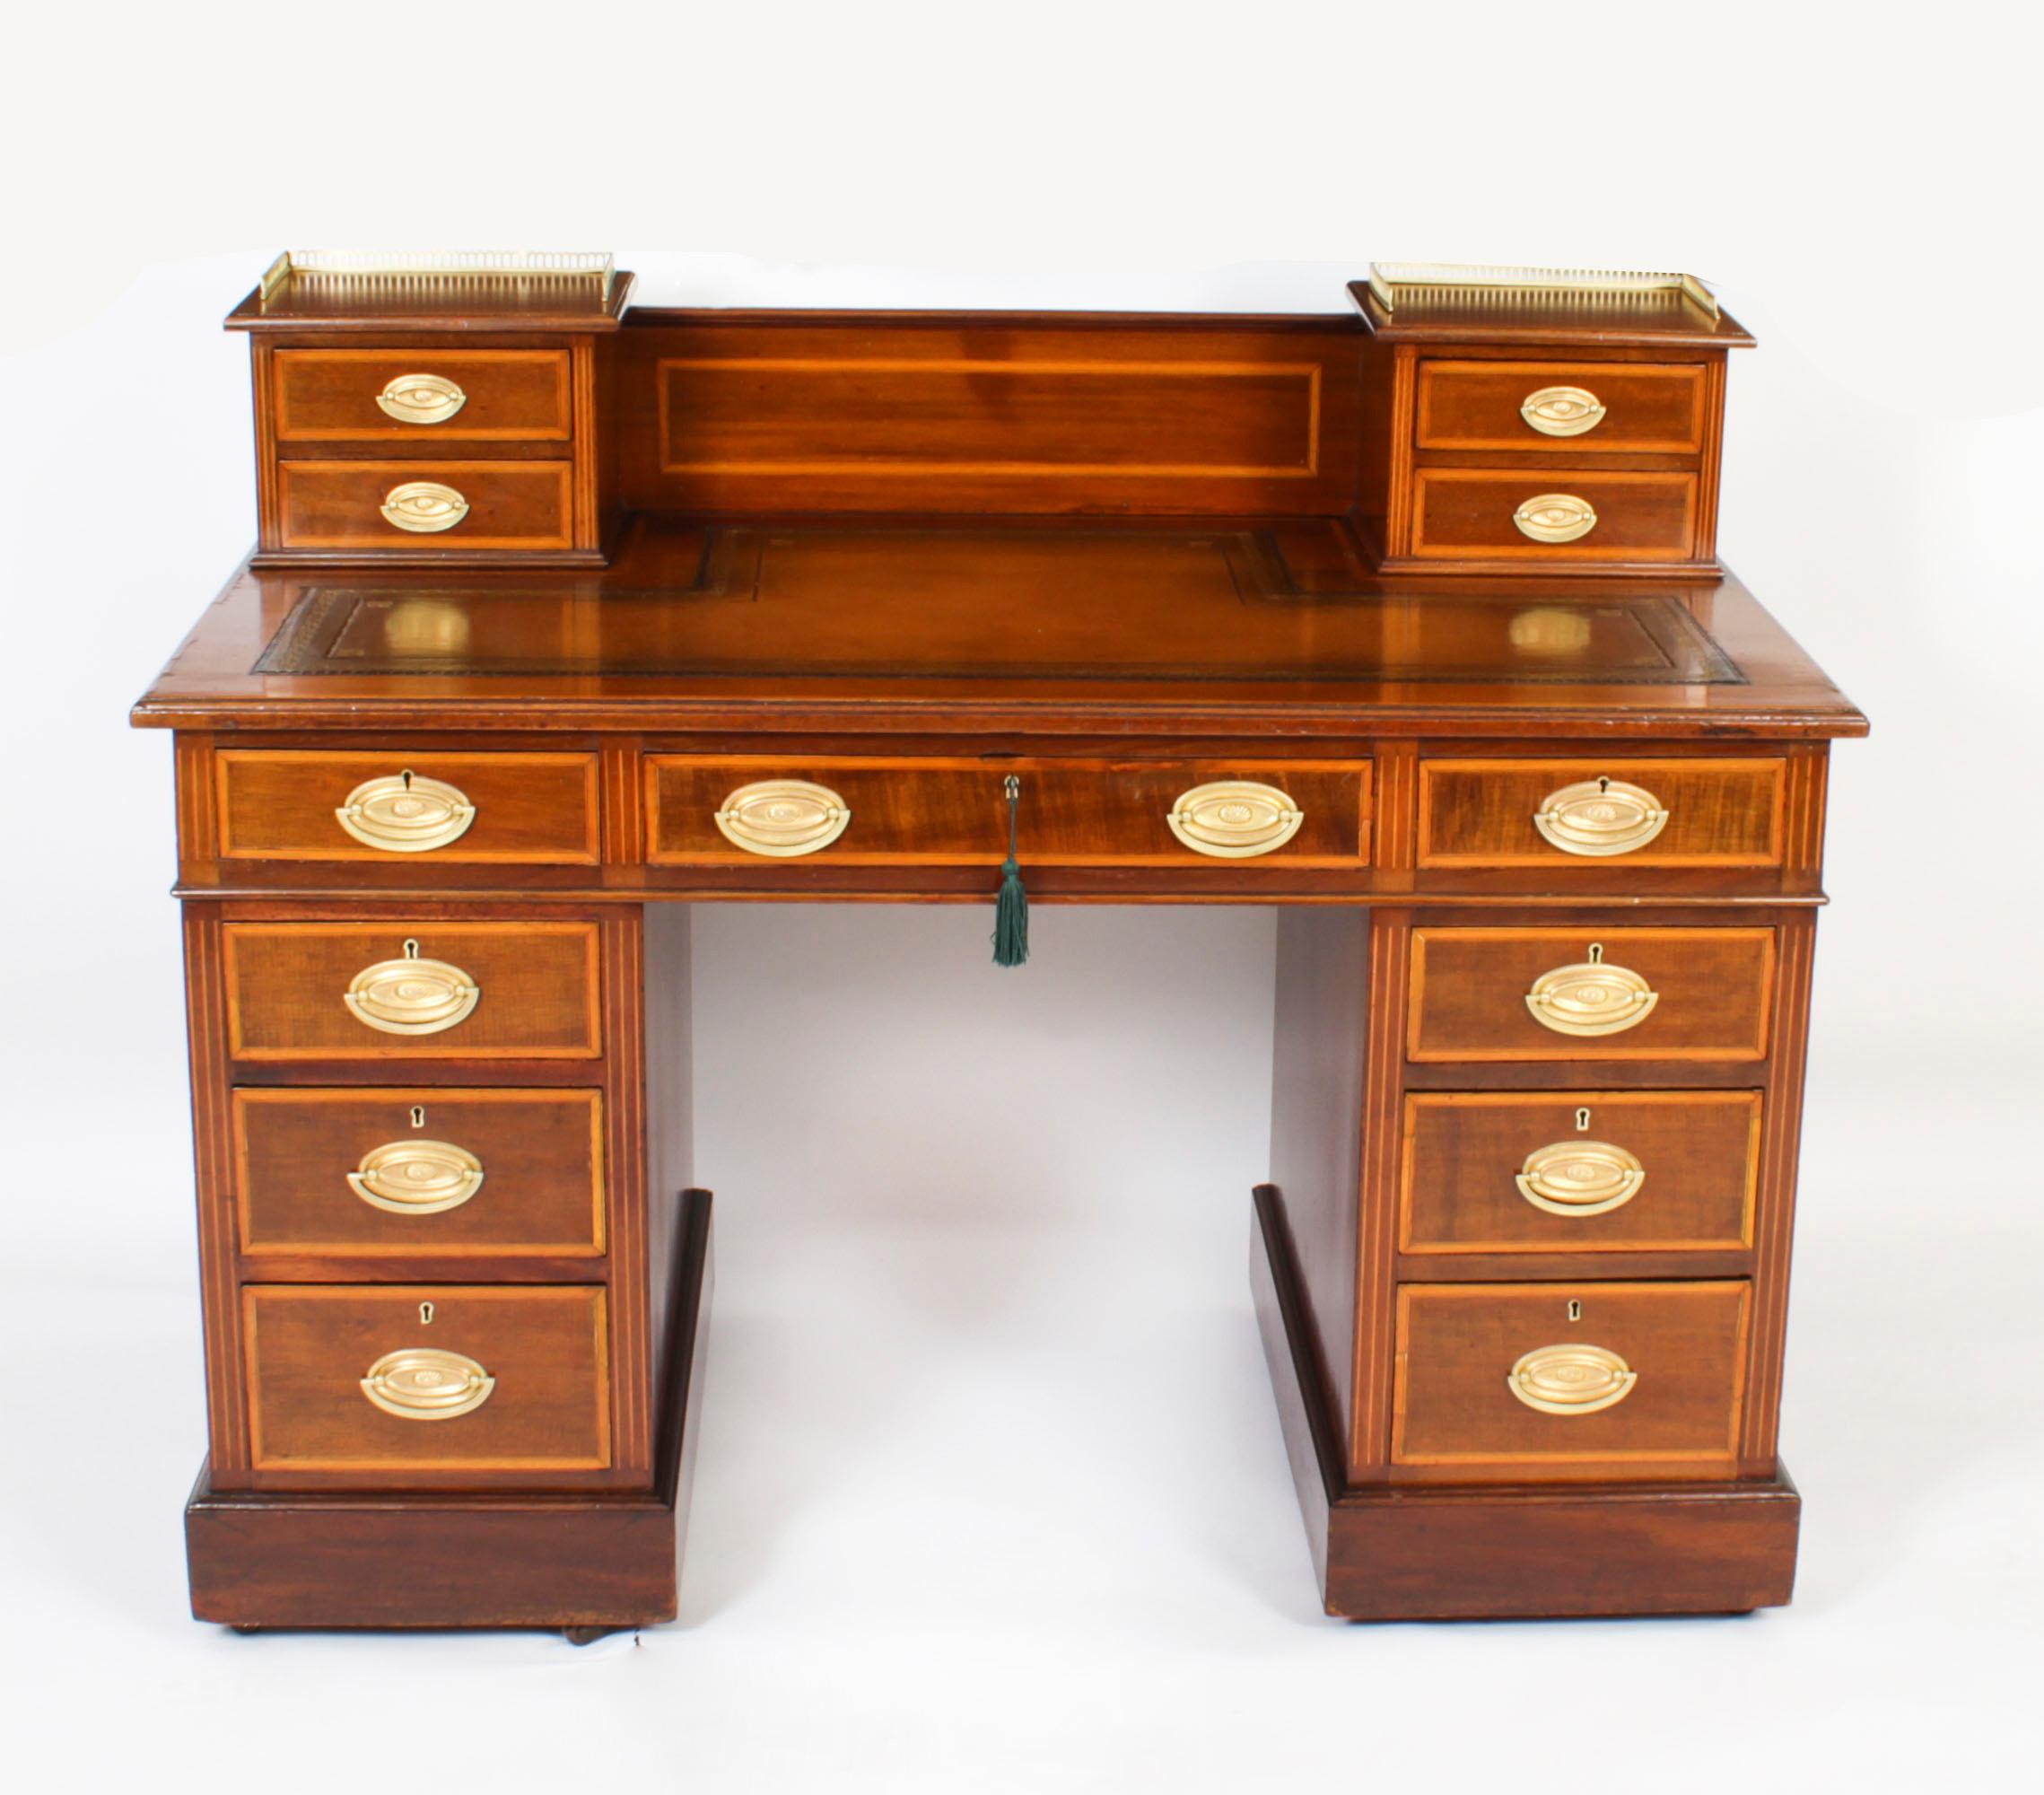 This is a superb antique Late Victorian Flame mahogany string inlaid and satinwood crossbanded pedestal kneehole desk, circa 1880 in date.

It is made from fabulous flame mahogany, the rectangular top with an inset shaped olive green and tan  gold